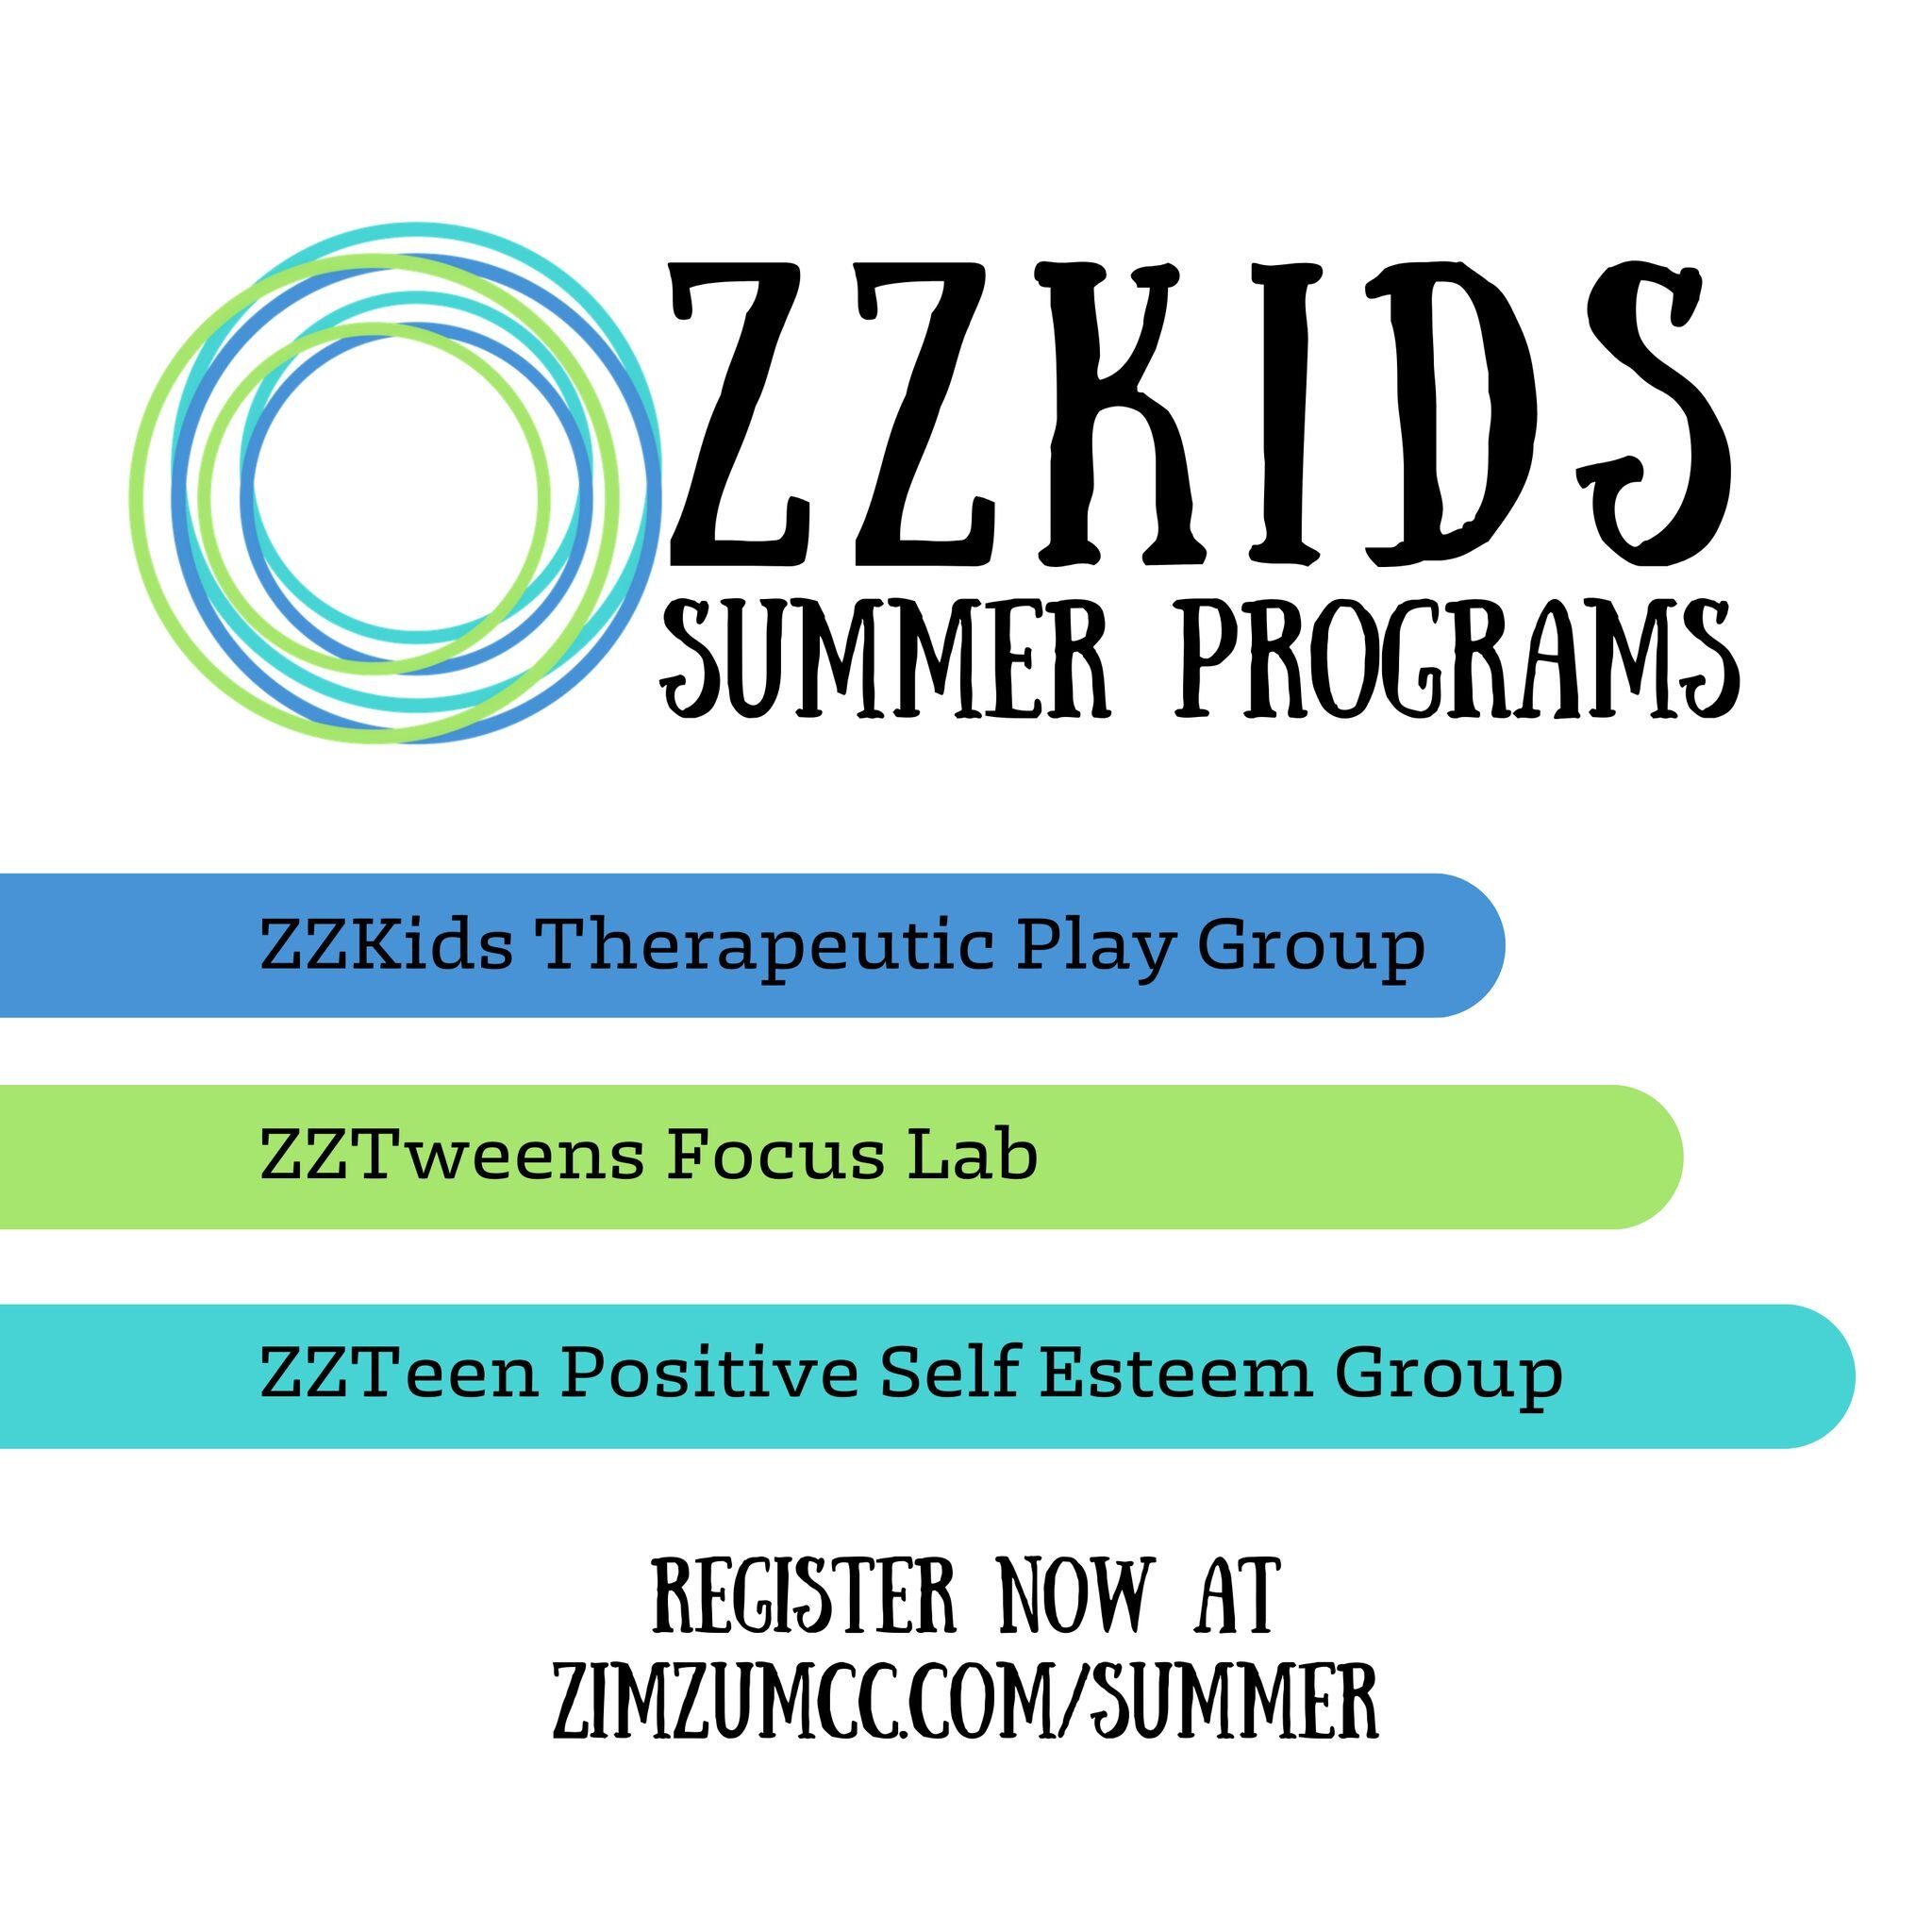 From our kids social skills play group, to our tweens self esteem group, we offer a variety of summer programs to help enhance your children's life, this summer and beyond. 
🫶✨
Registration is open for a limited number of participants, now through M